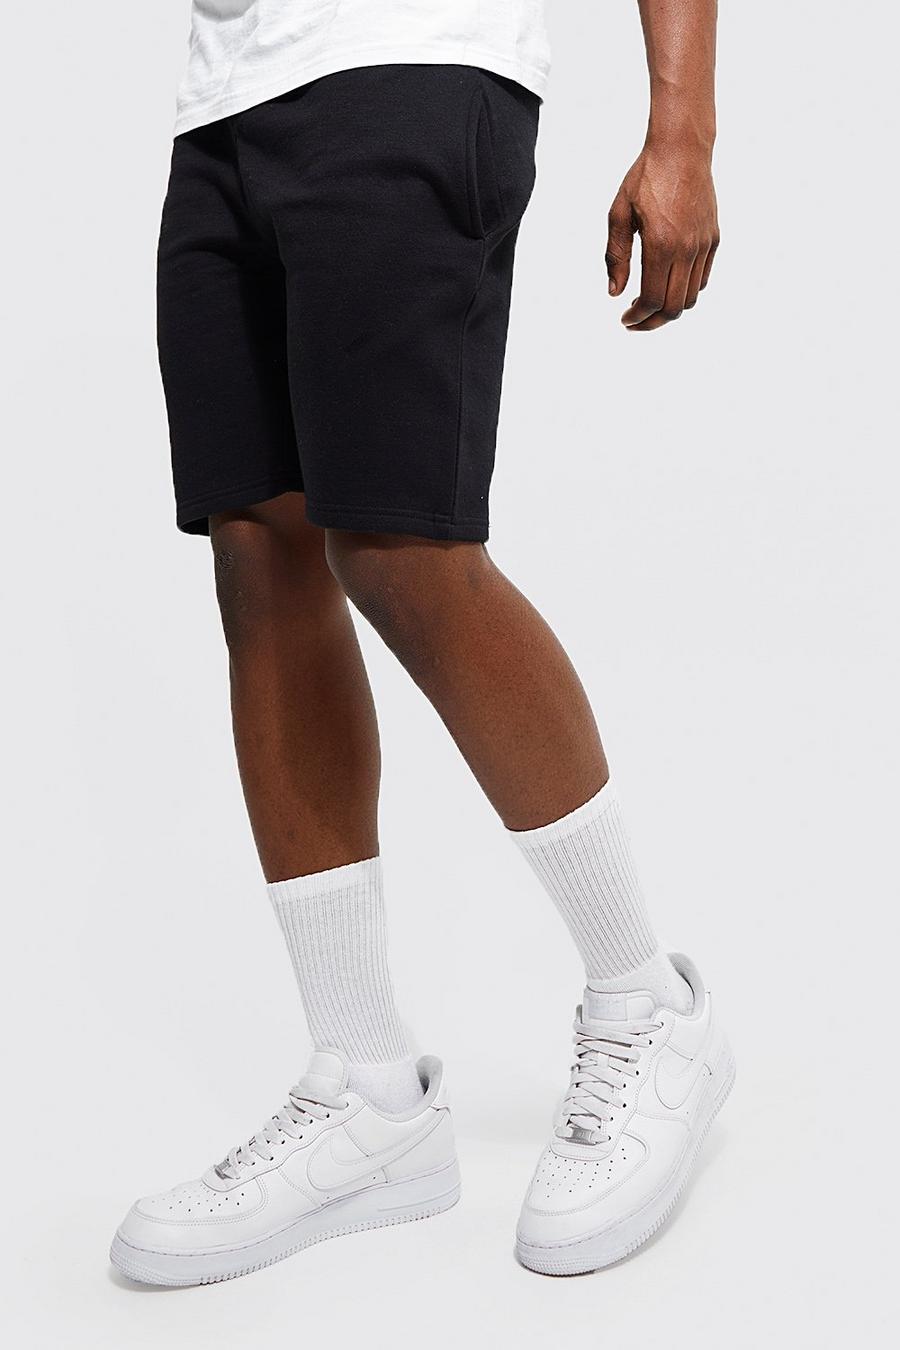 Black Slim Mid Length Jersey Short with REEL Cotton